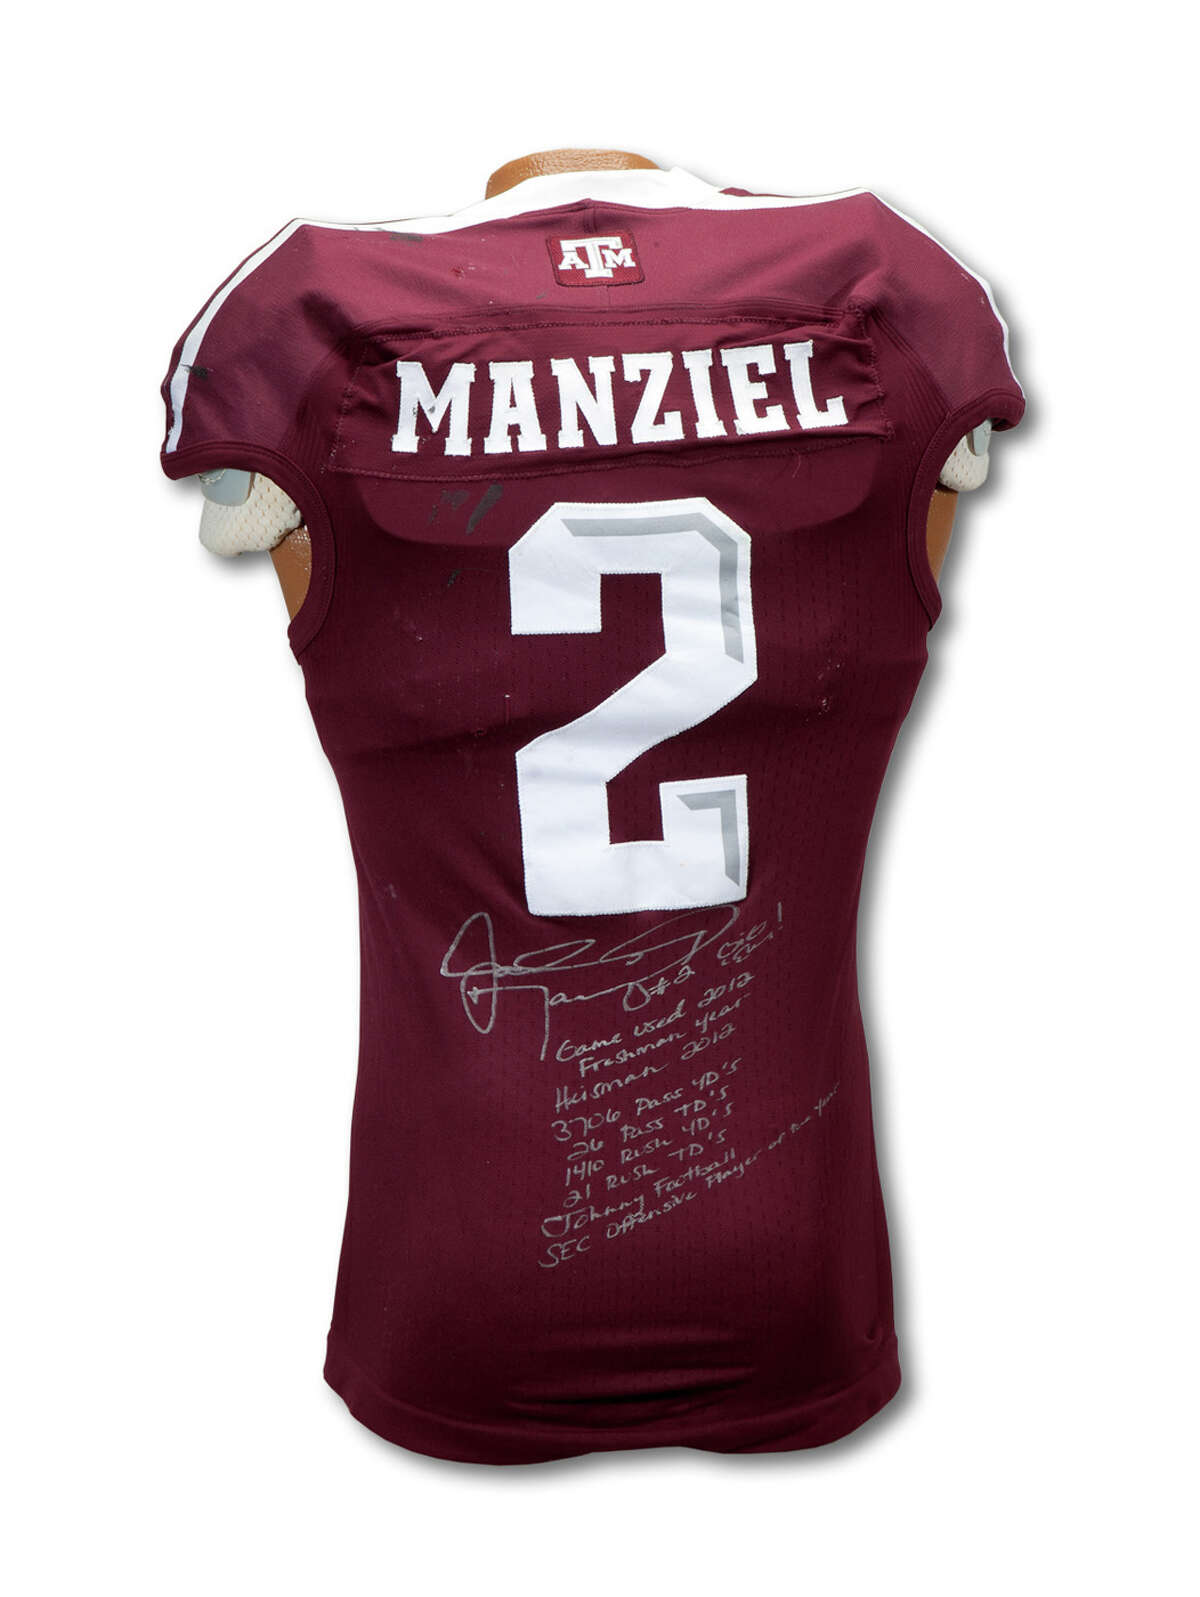 A Texas A&M football jersey worn in six games by Johnny Manziel is expected to sell for more than $100,000, according to SCP Auctions, the company selling the uniform.